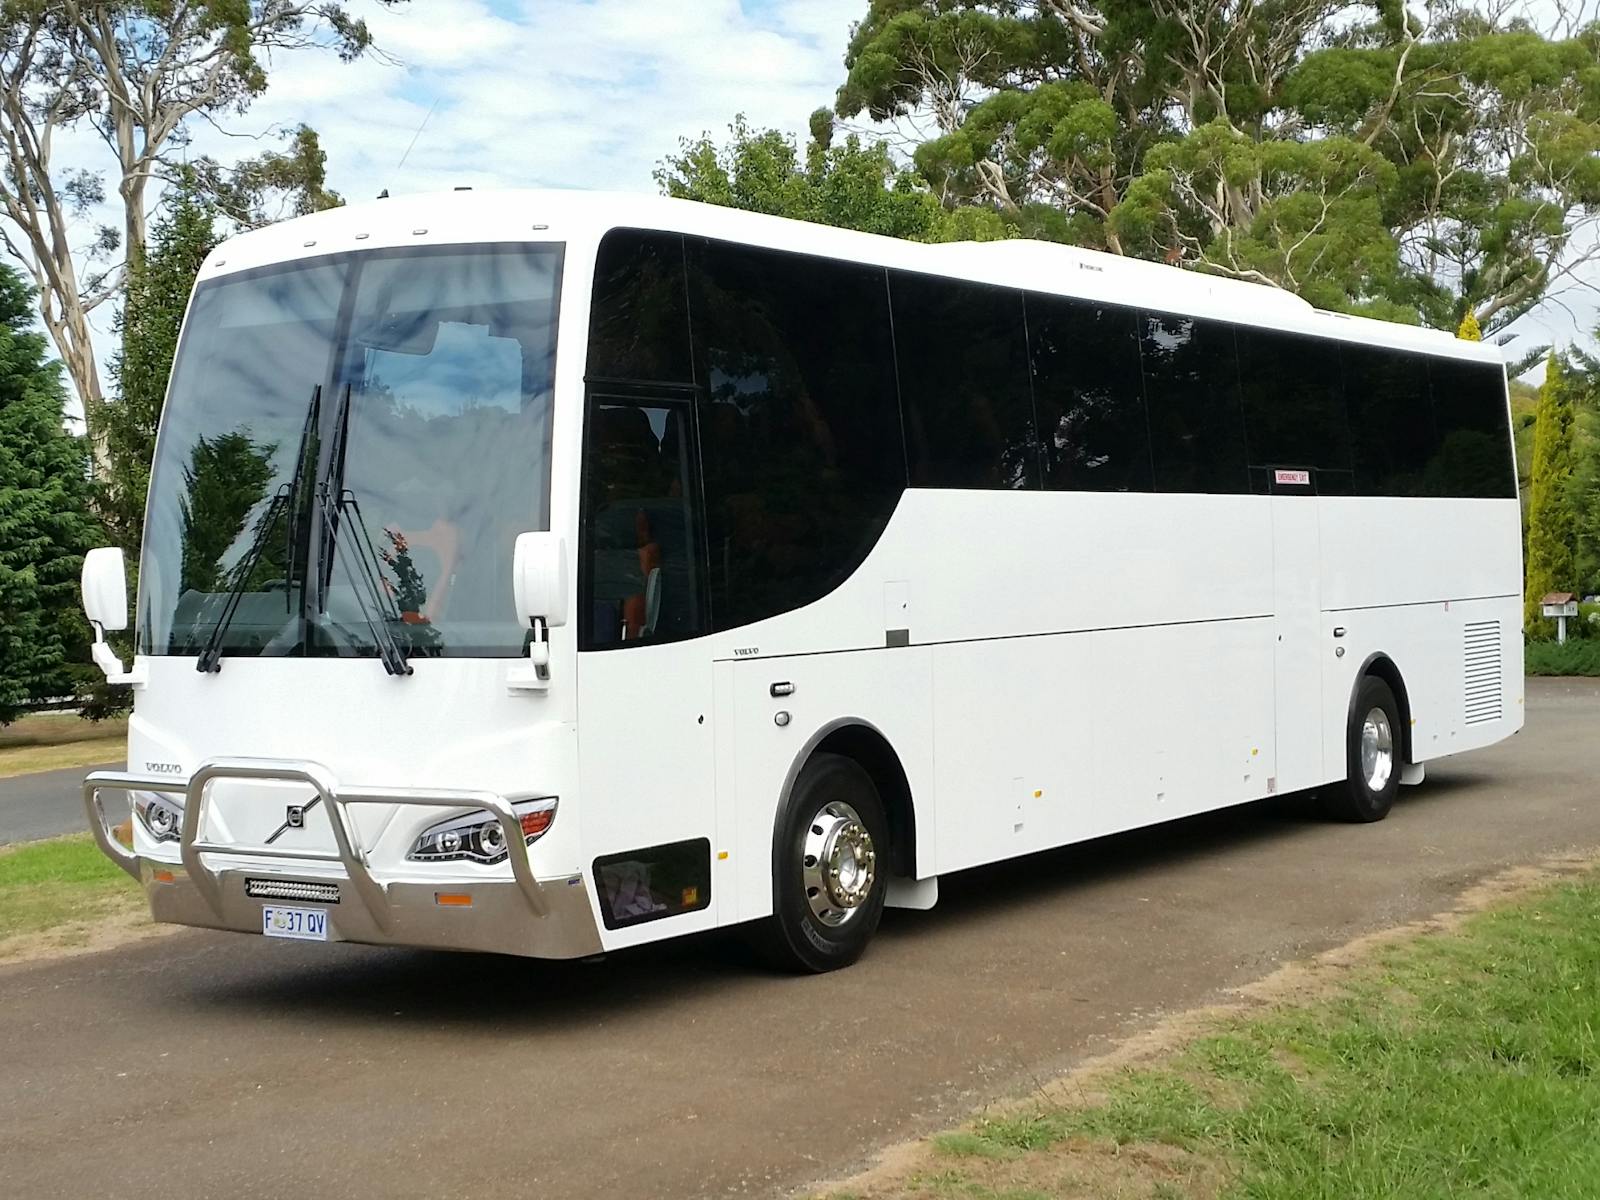 These coaches offer superior safety and passenger comfort.